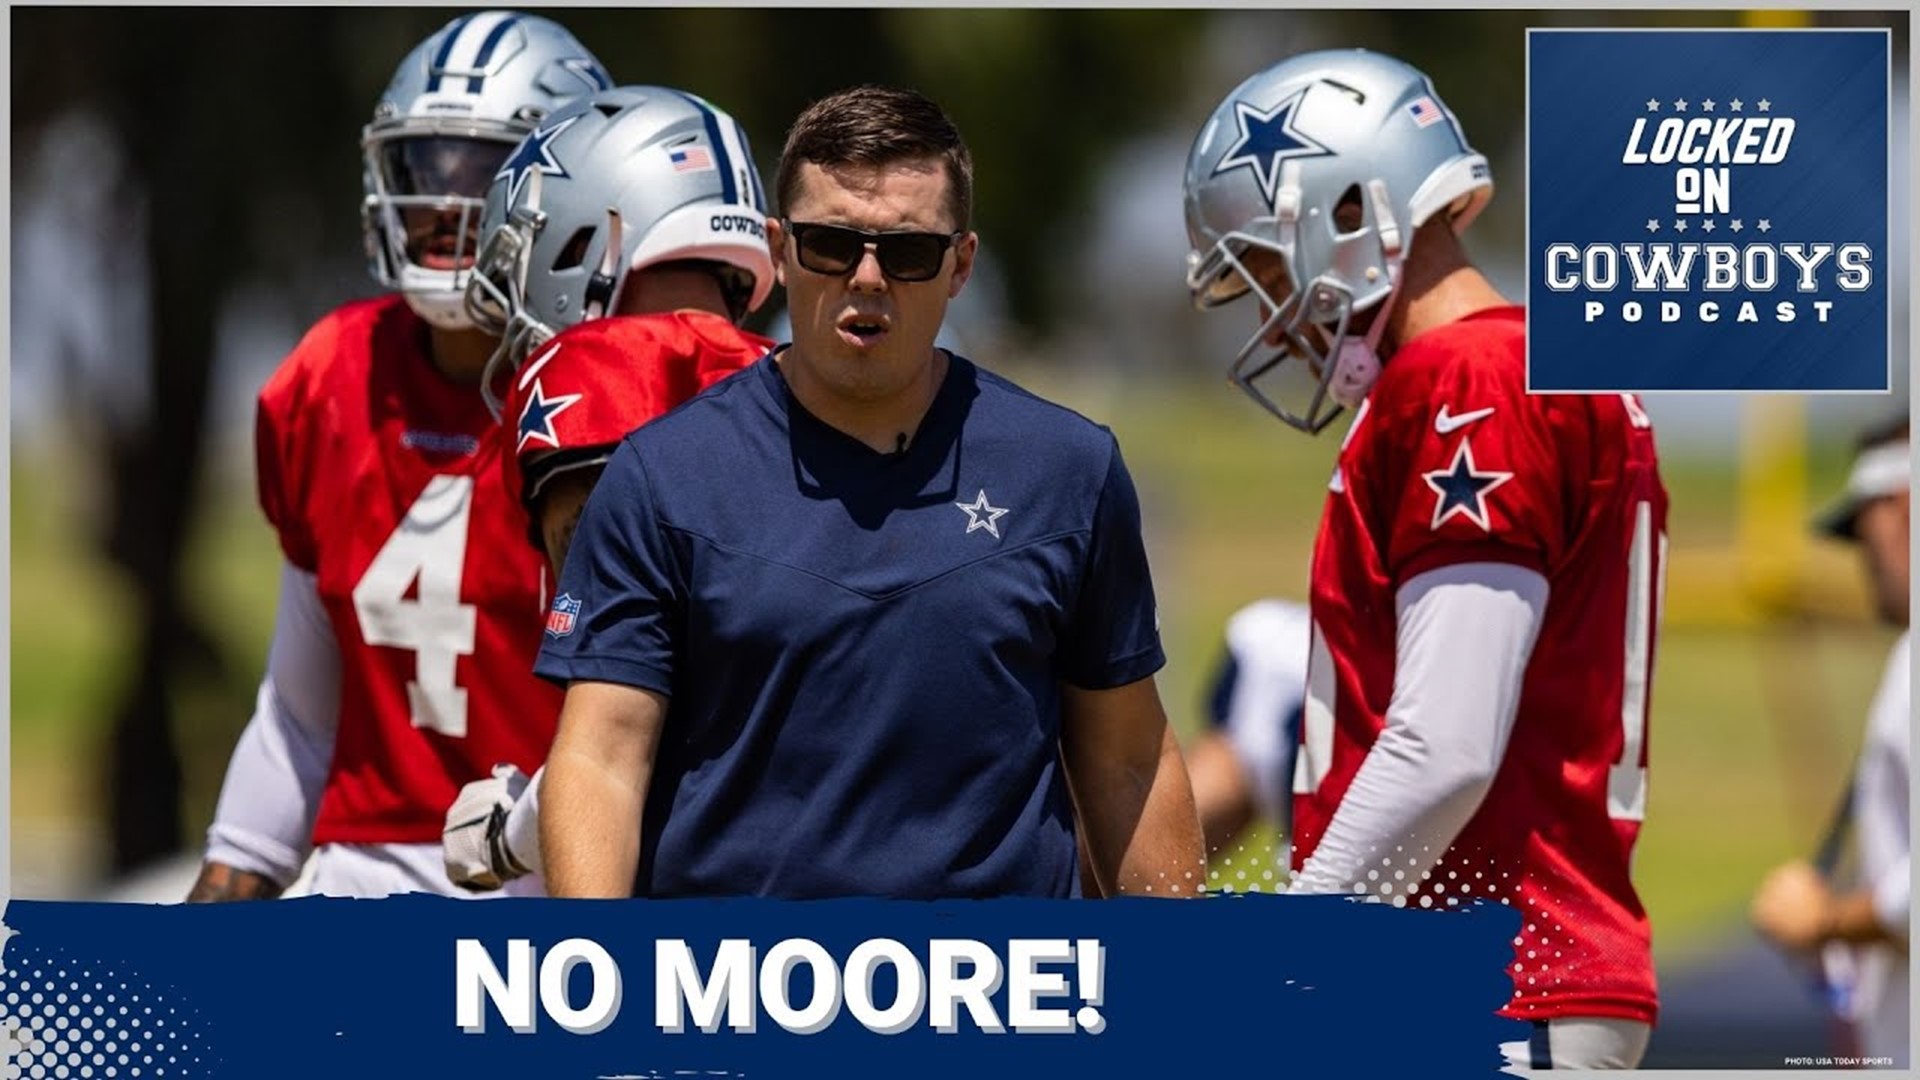 Marcus Mosher and Landon McCool of Locked On Cowboys discuss the Dallas Cowboys moving on from offensive coordinator Kellen Moore. Why make the move now?